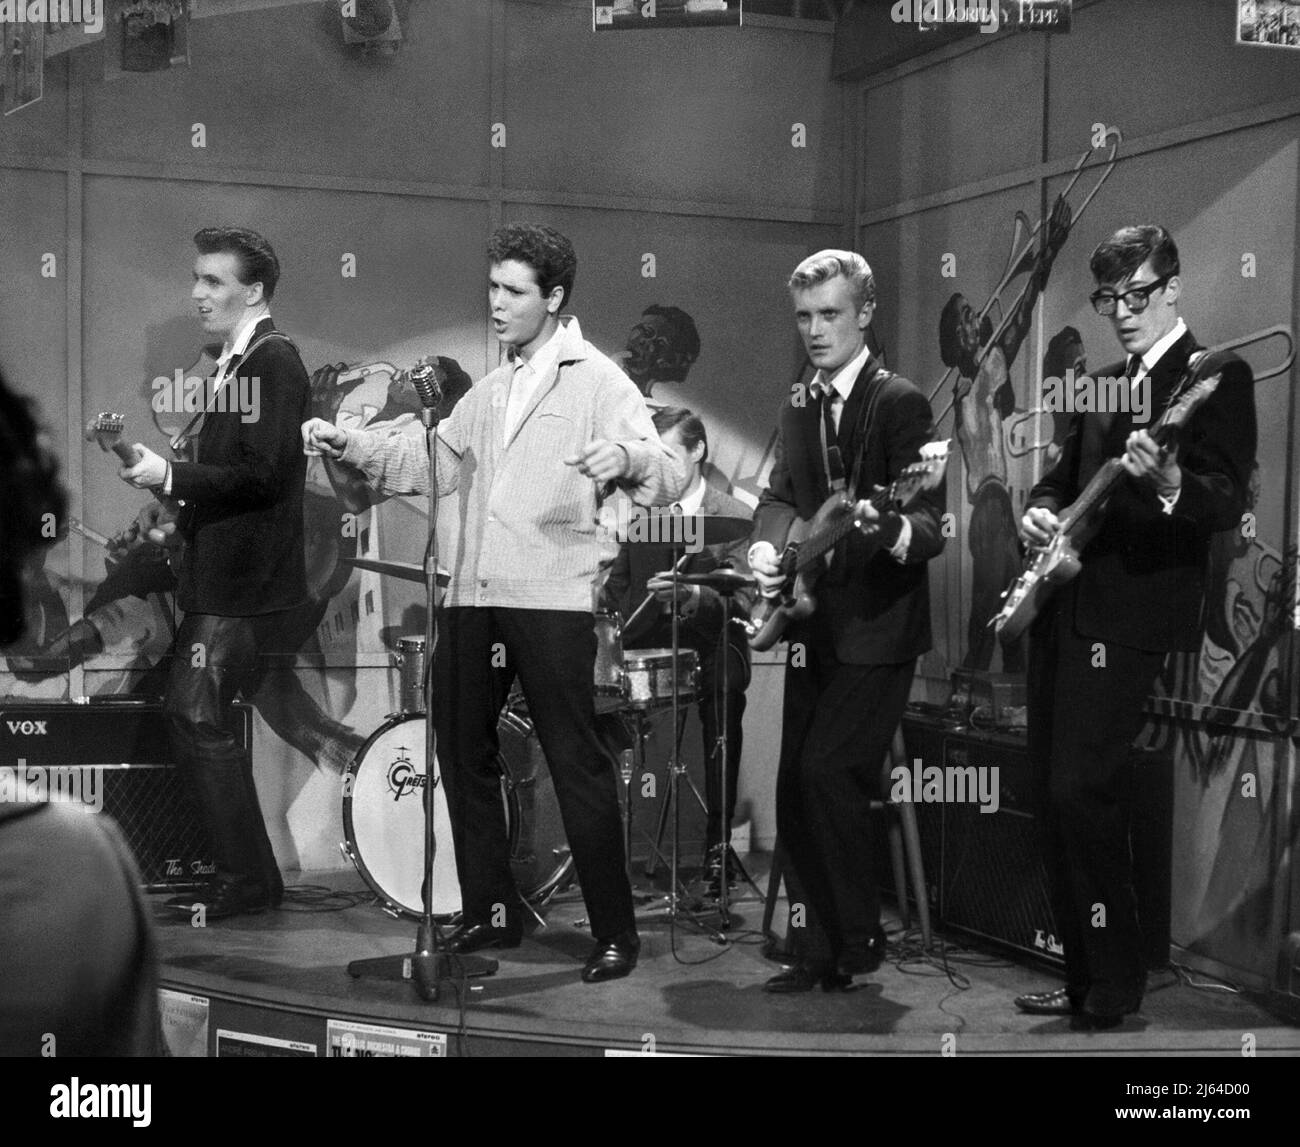 WELCH,RICHARD,HARRIS,SHADOWS), THE YOUNG ONES, 1961 Stock Photo